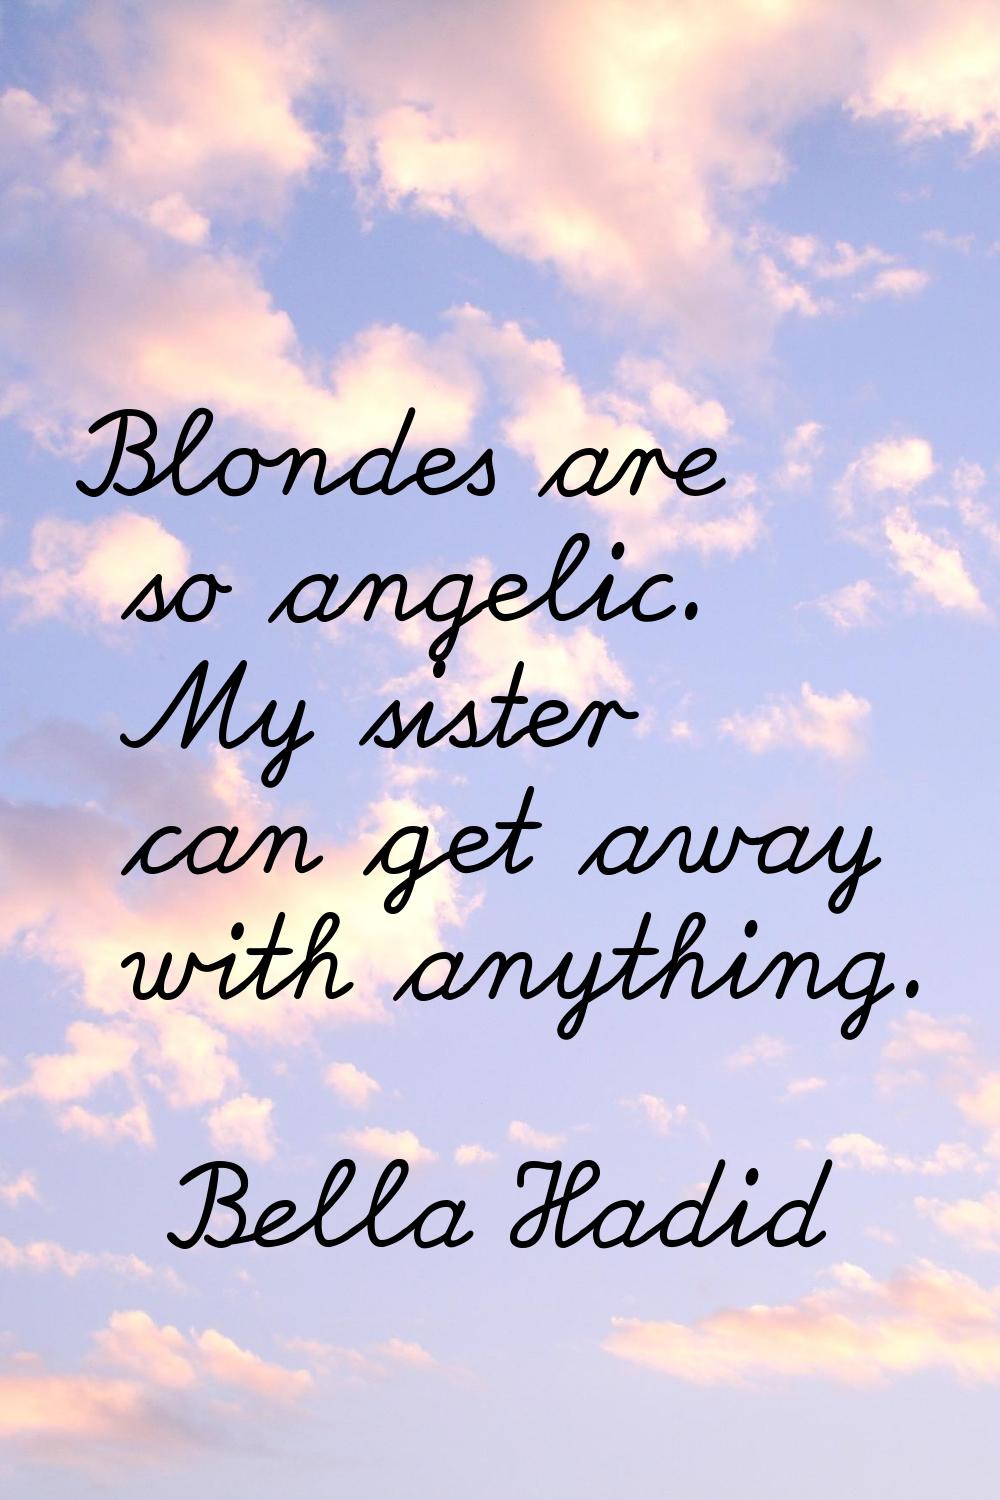 Blondes are so angelic. My sister can get away with anything.